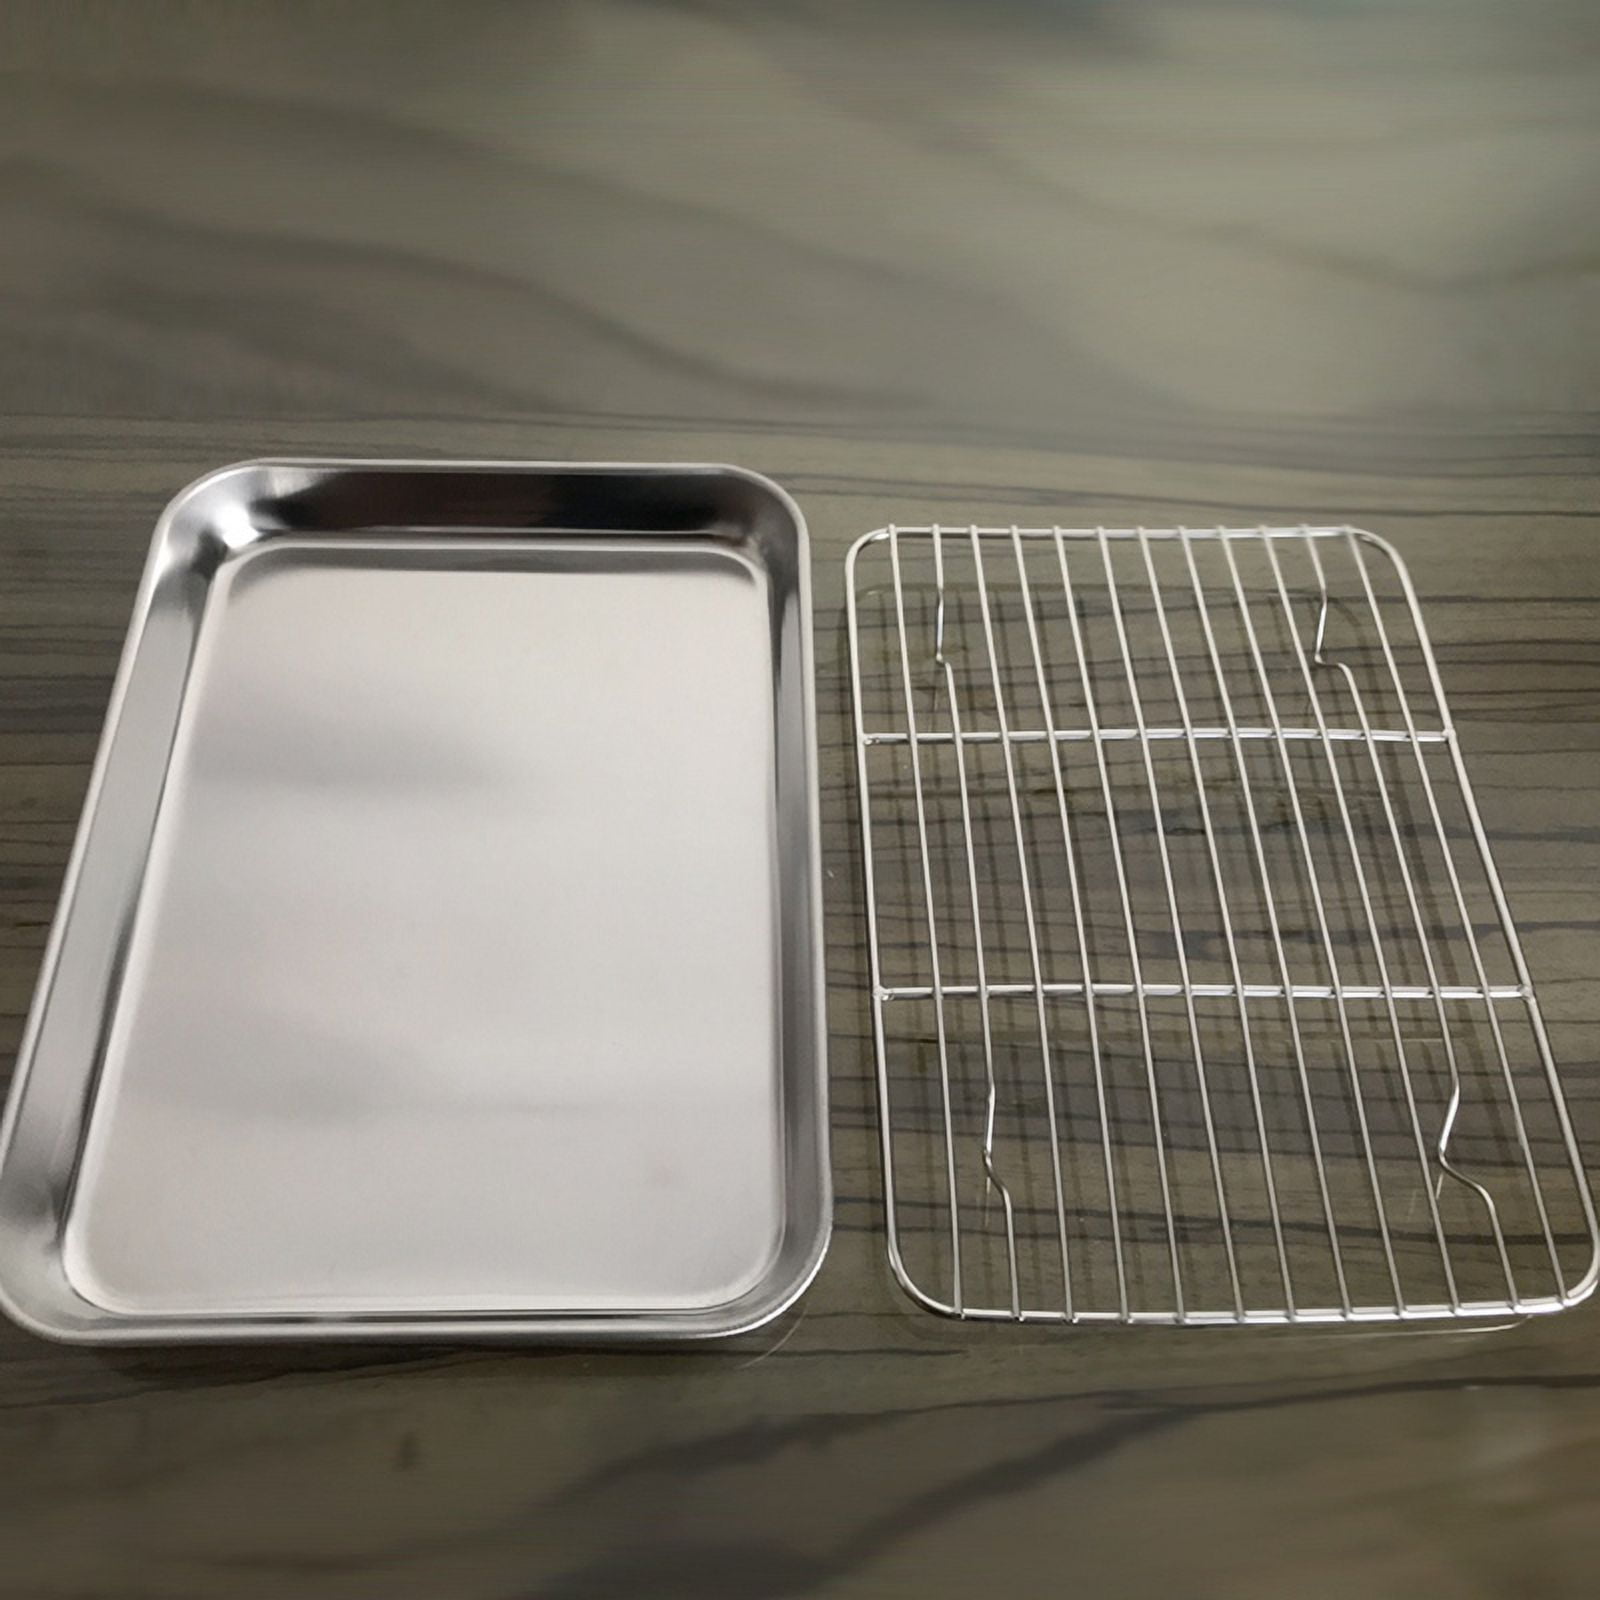 Baking Sheet and Rack Set, E-far Stainless Steel Rimmed Cookie Sheet Baking  Pans Toaster Oven Tray with Cooling Rack, Non Toxic & Healthy, Rust Free 